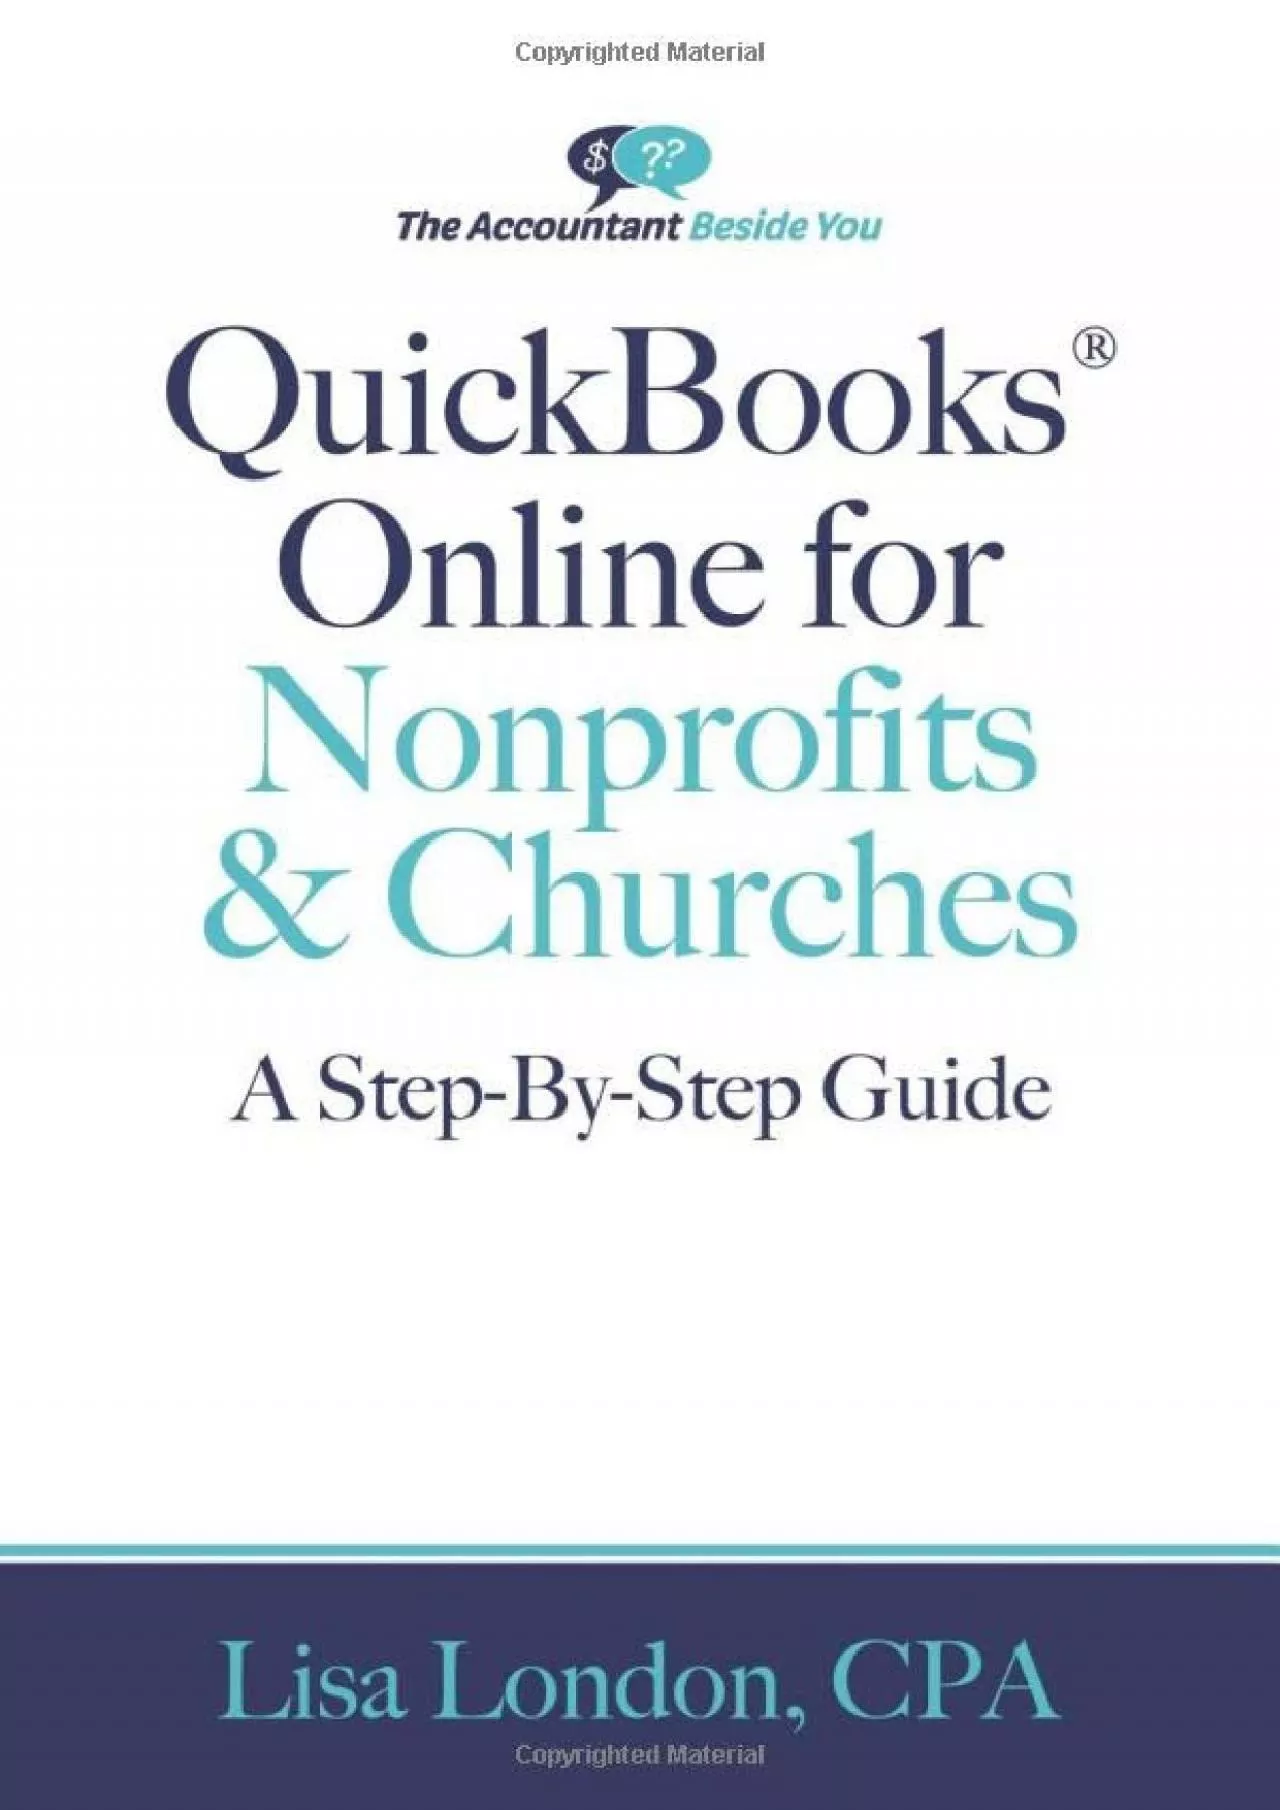 (BOOK)-QuickBooks Online for Nonprofits & Churches: The Step-By-Step Guide (The Accountant